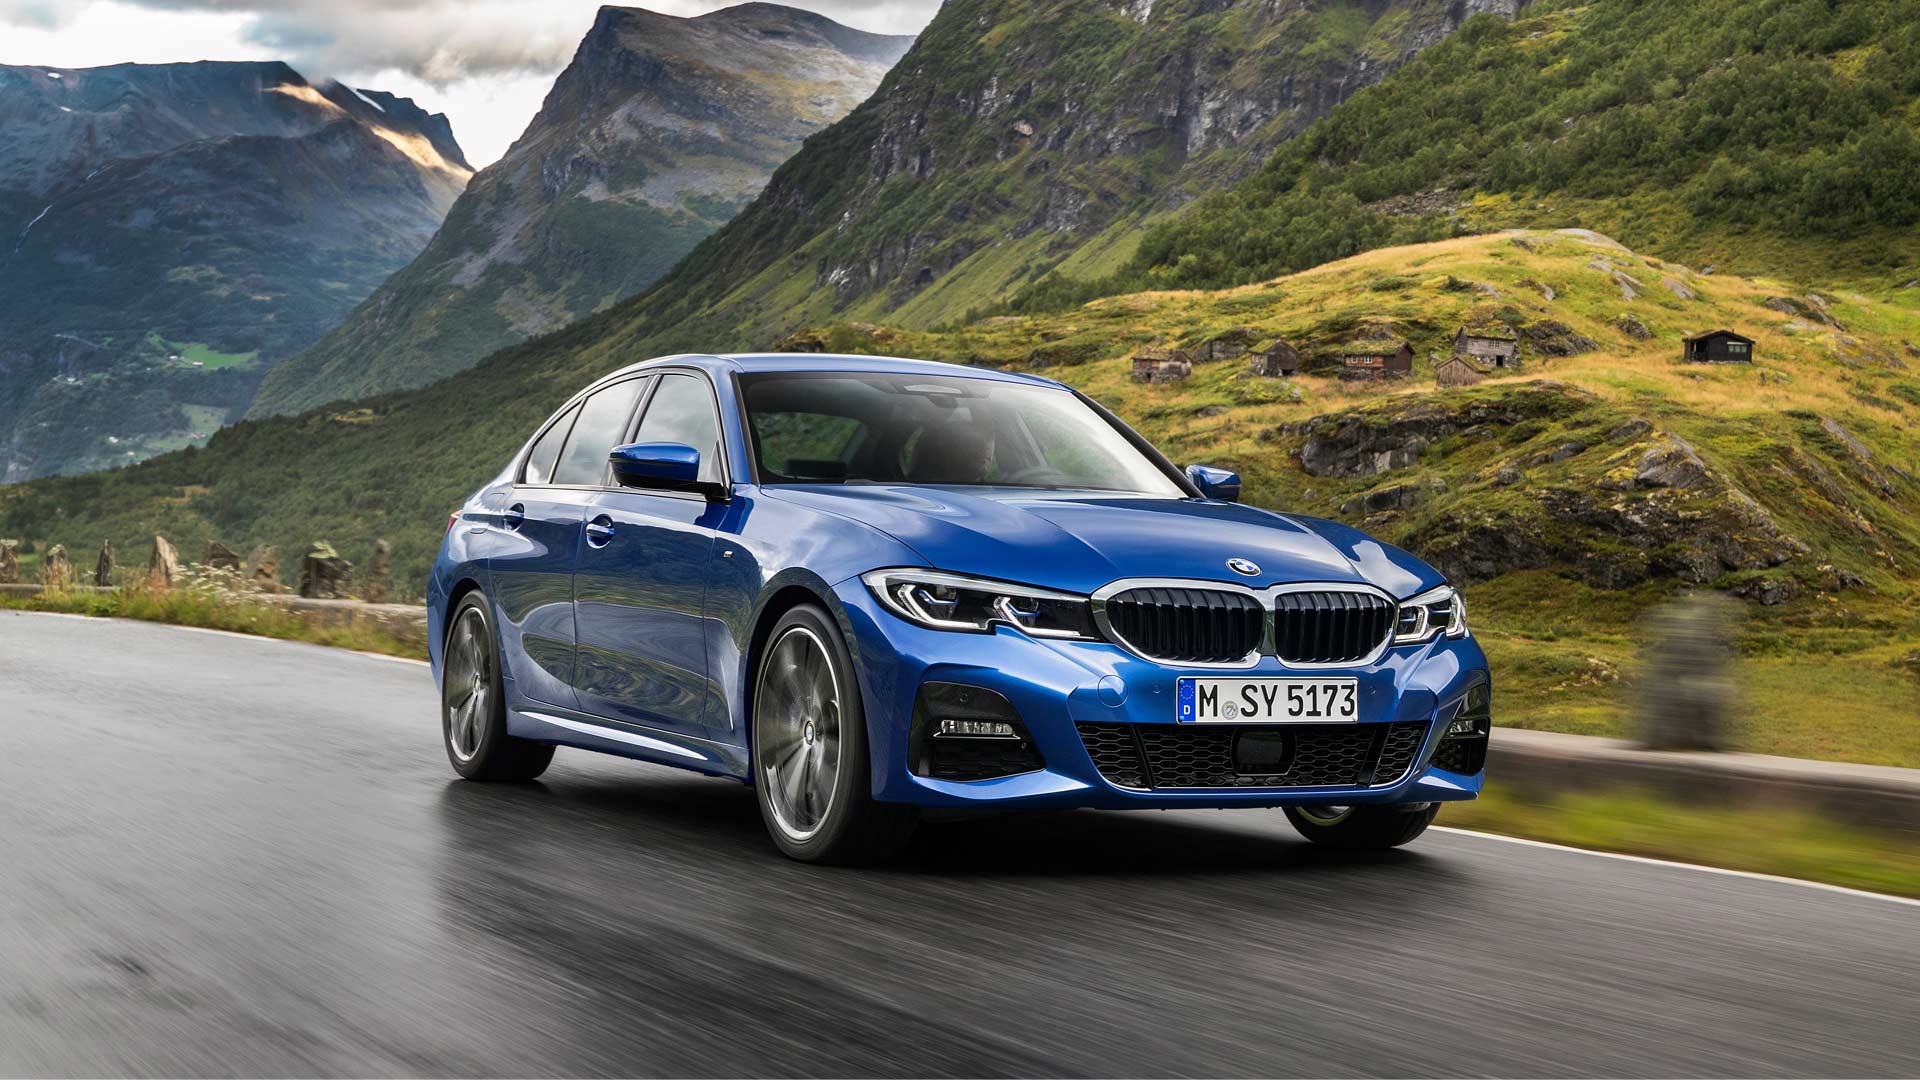 7th generation BMW 3 Series is larger in dimensions and